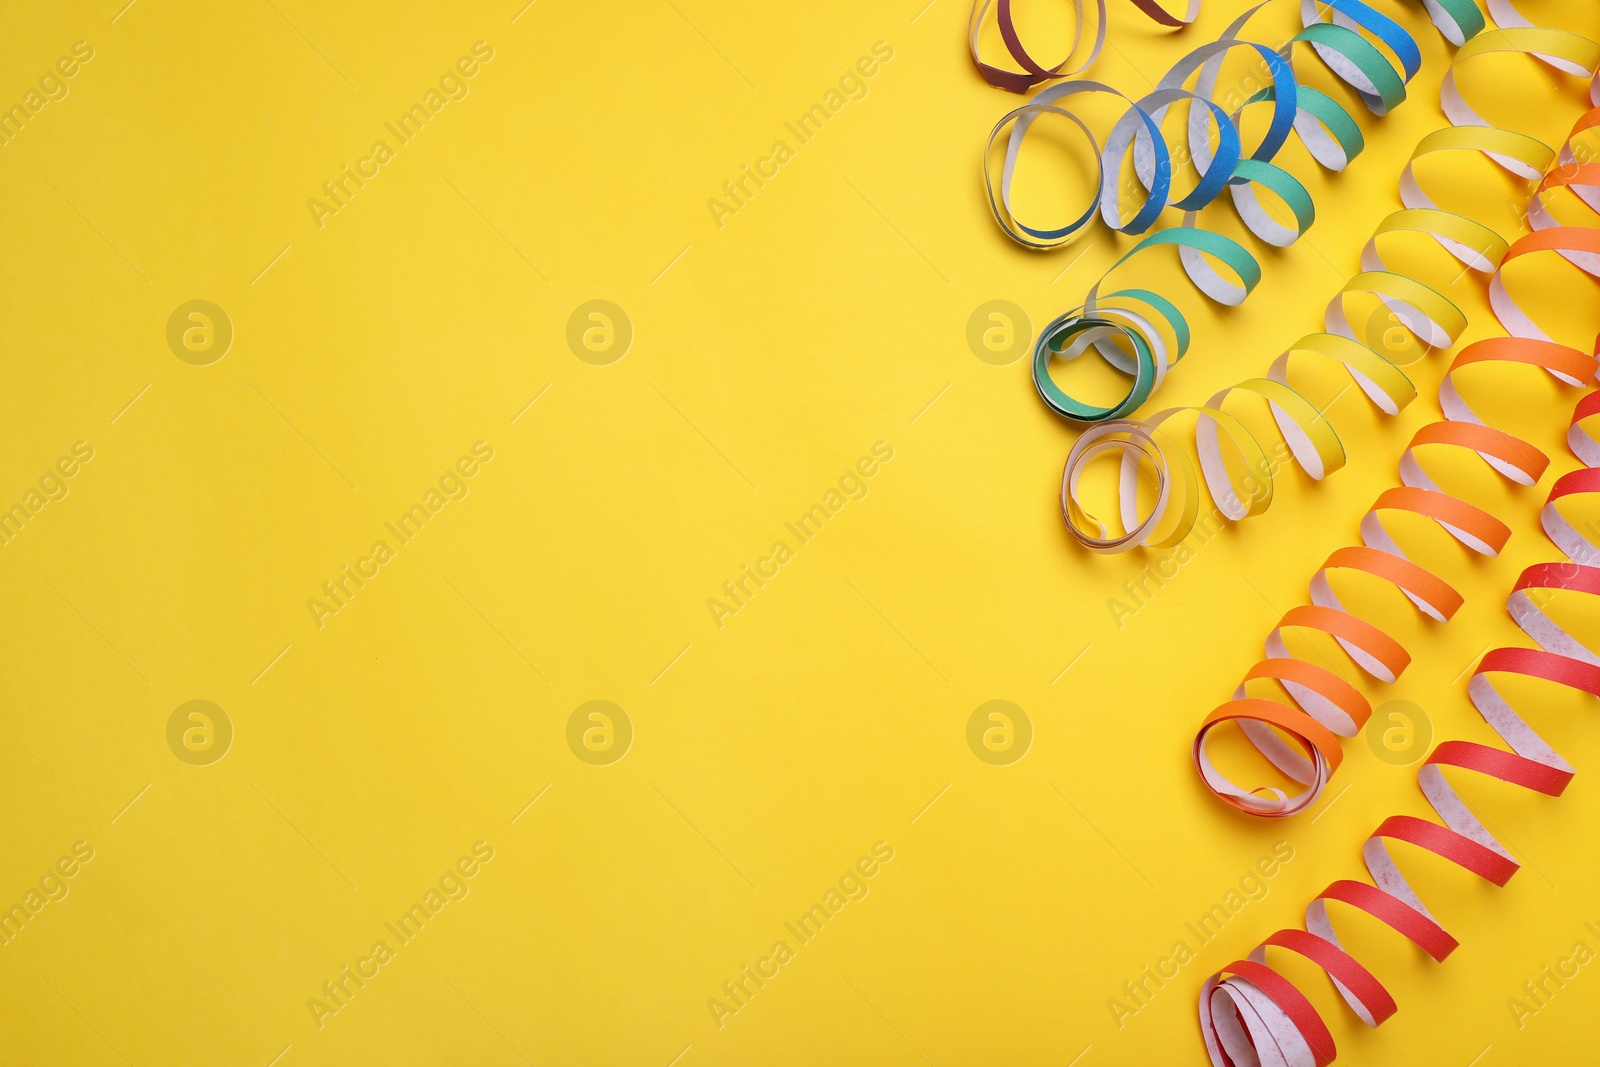 Photo of Rainbow serpentine streamers on yellow background, flat lay with space for text. LGBT pride